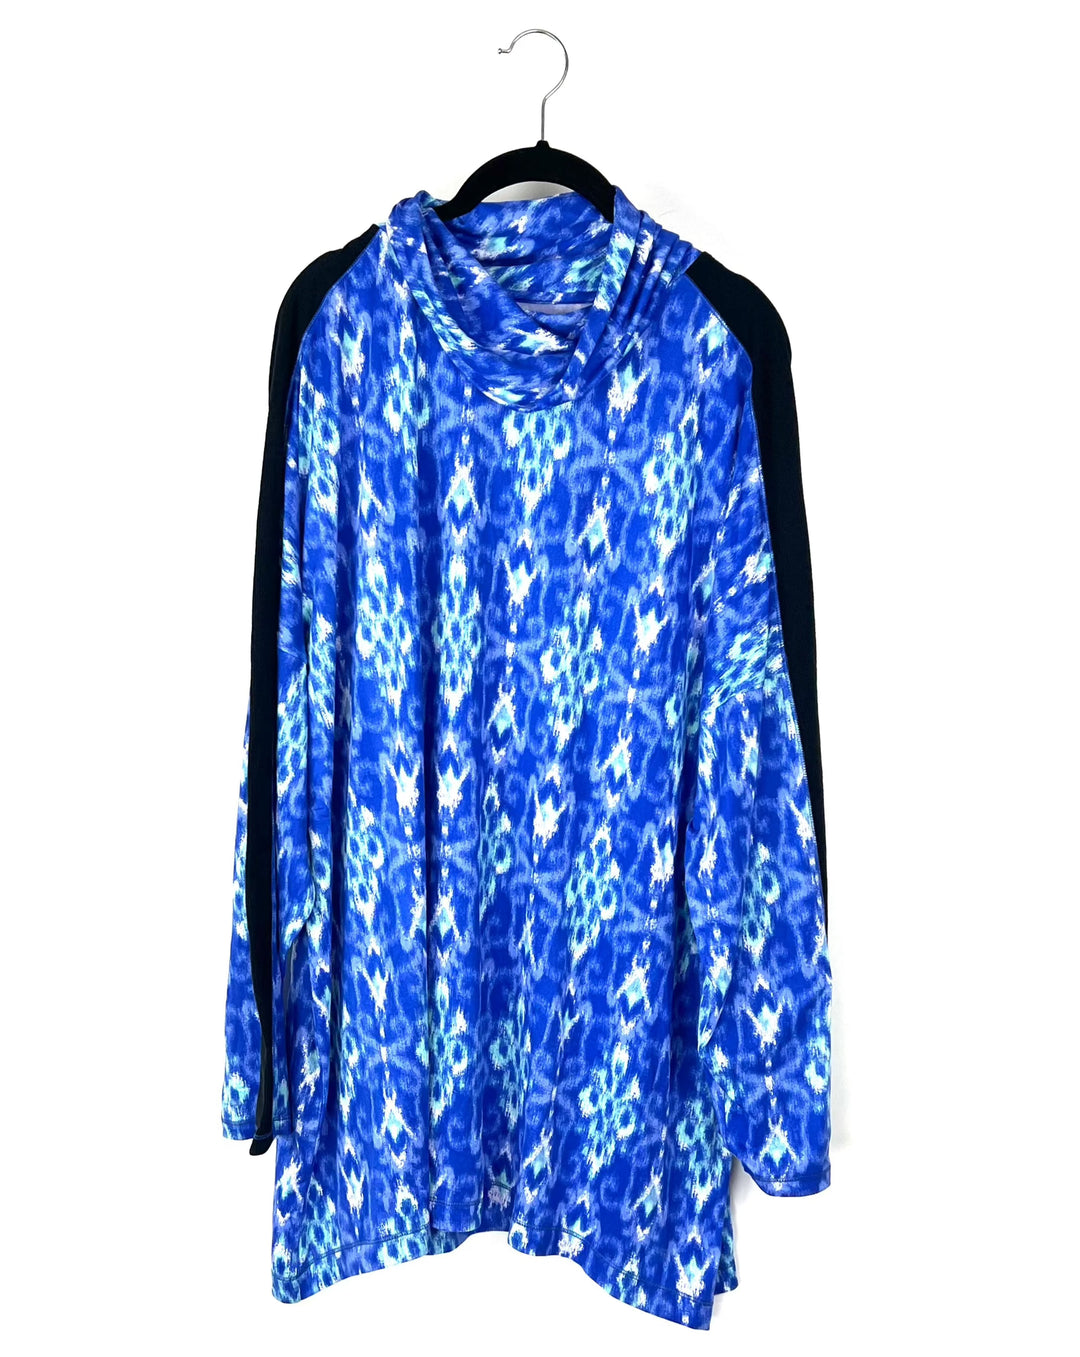 Blue and Black Printed Turtle Neck Long Sleeve Top - 1x